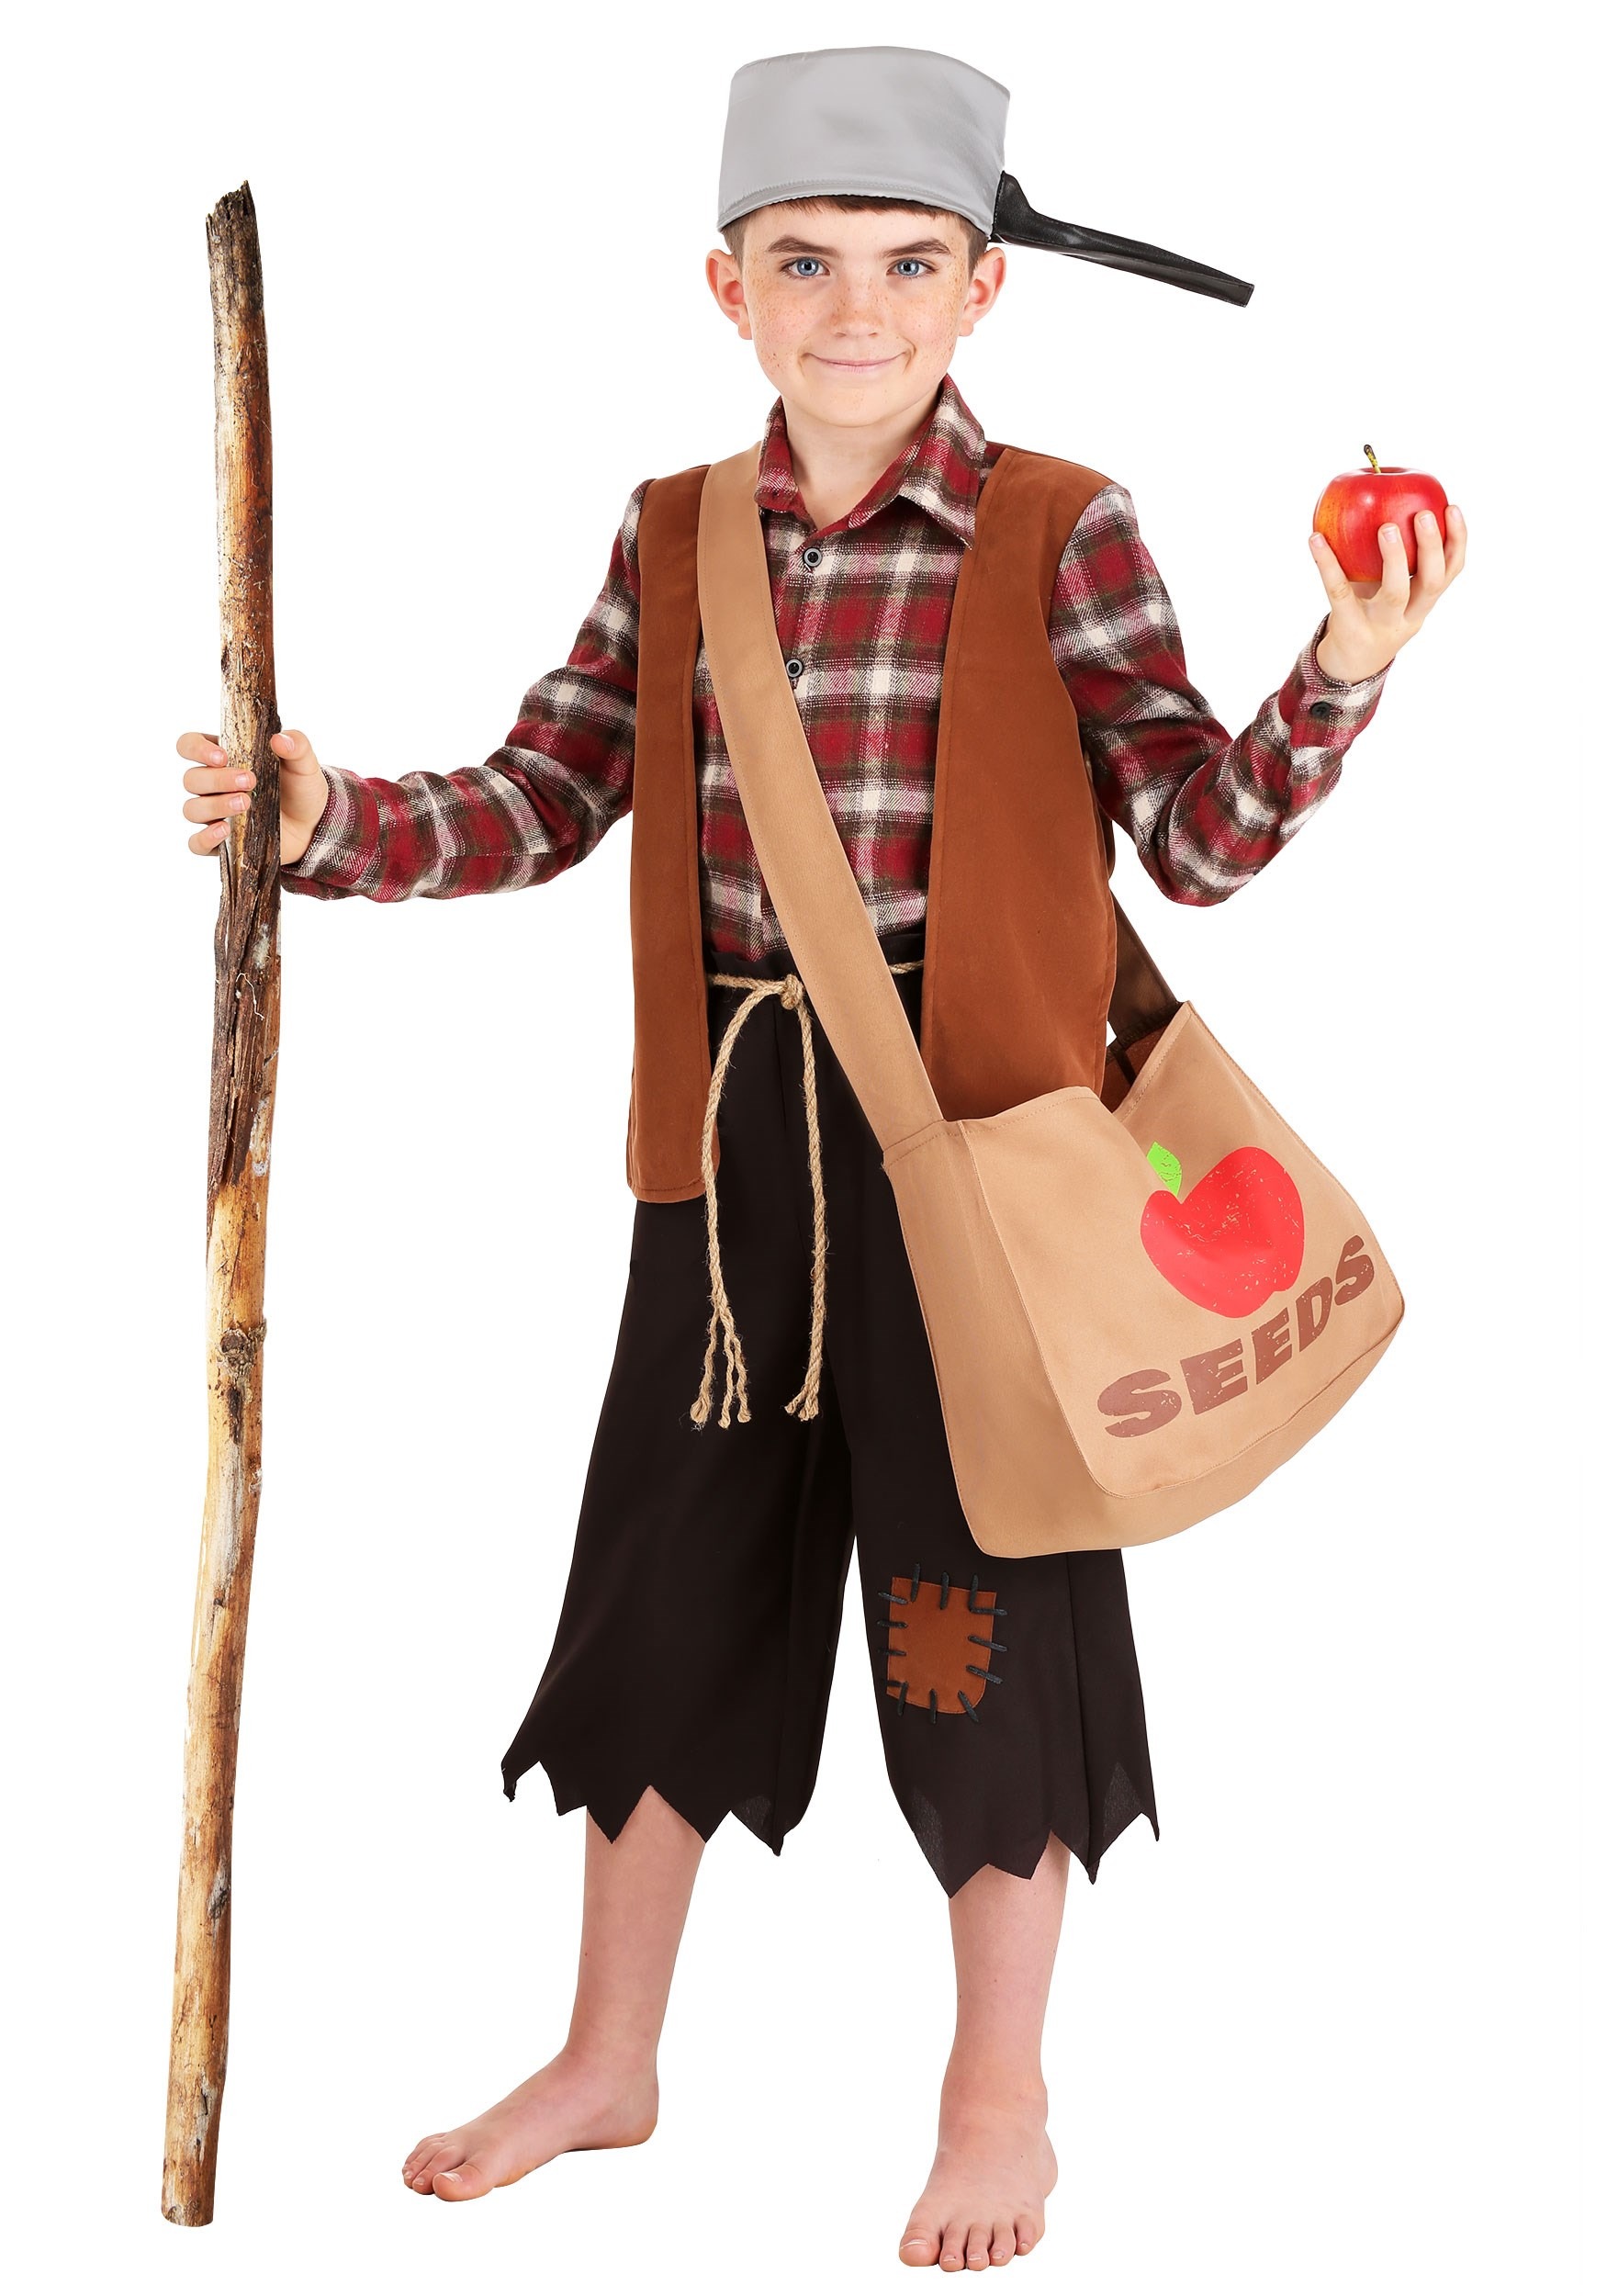 Photos - Fancy Dress FUN Costumes Johnny Appleseed Costume for Boys Brown/Yellow/Beige